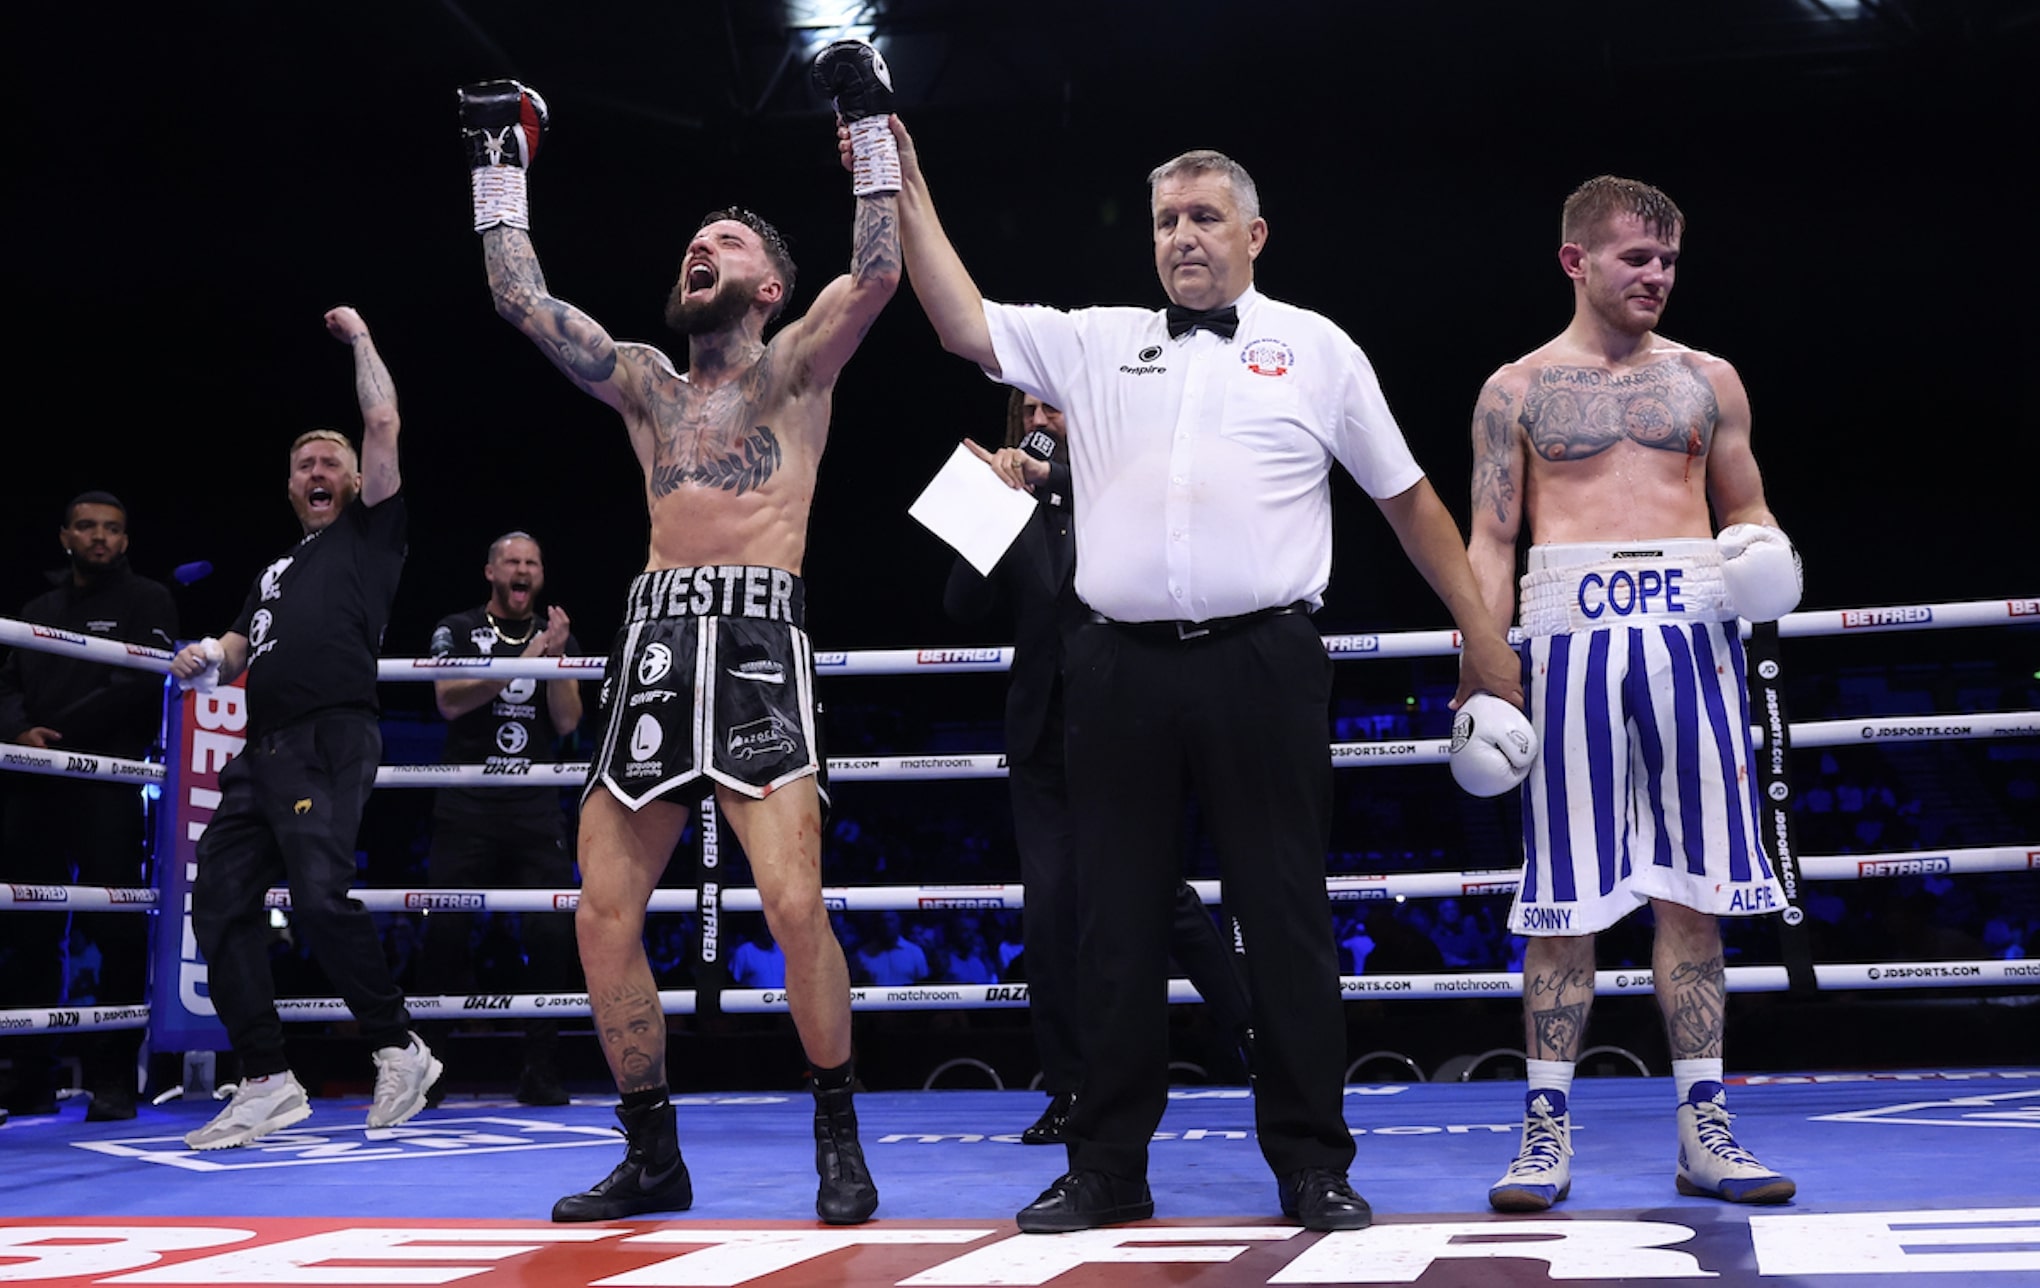 Adam Cope: Bemused by English title loss to Lewis Sylvester